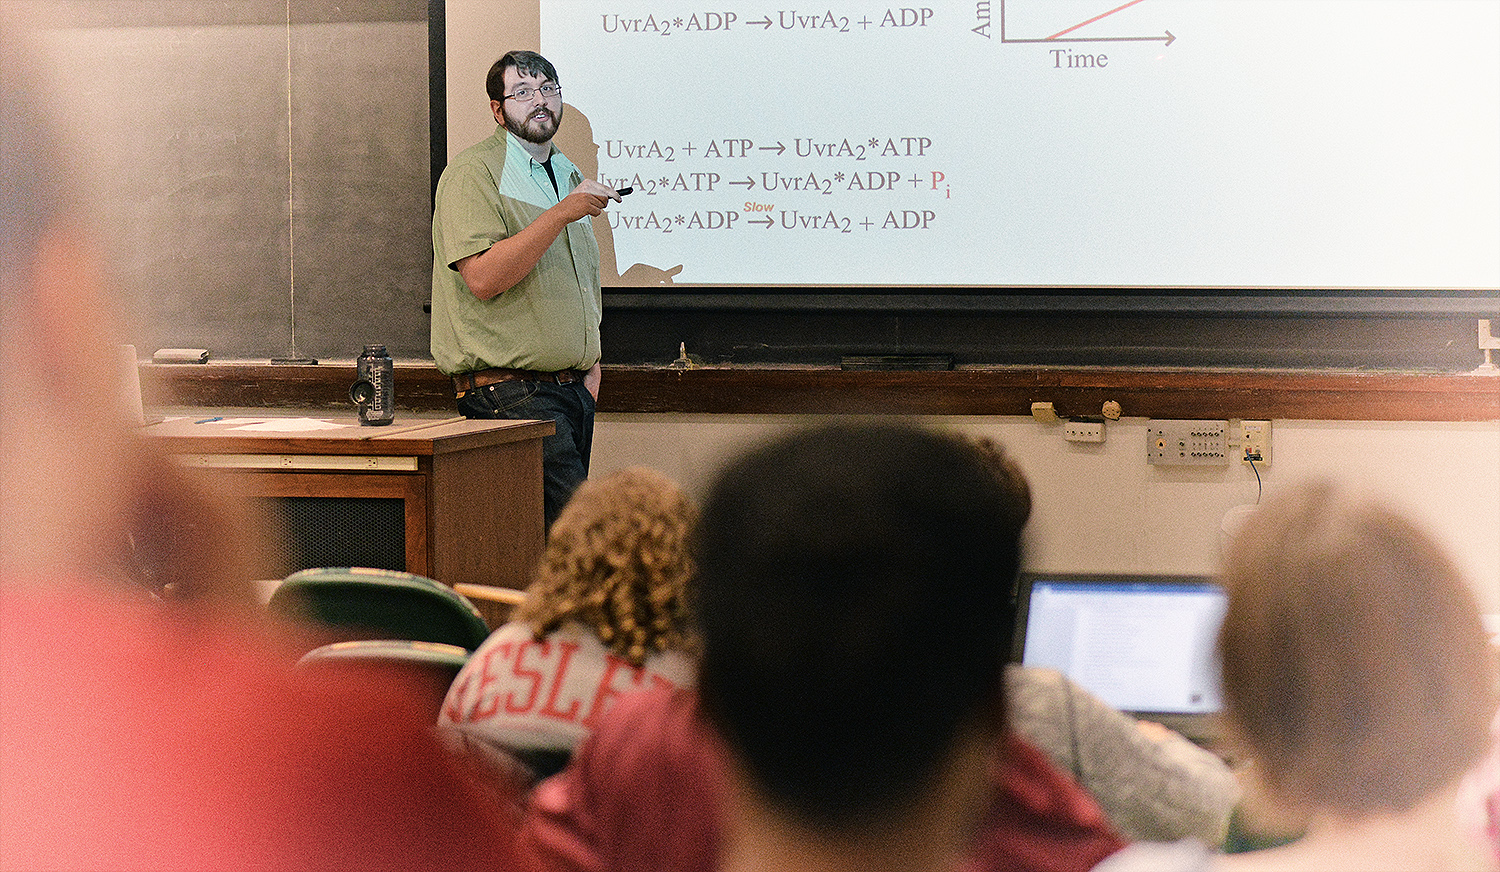 On March 7, Brandon Case, a PhD candidate in molecular biology and biochemistry, delivered a talk titled "Just Another Day Fixing the Double Helix" as part of the Graduate Speaker Series.